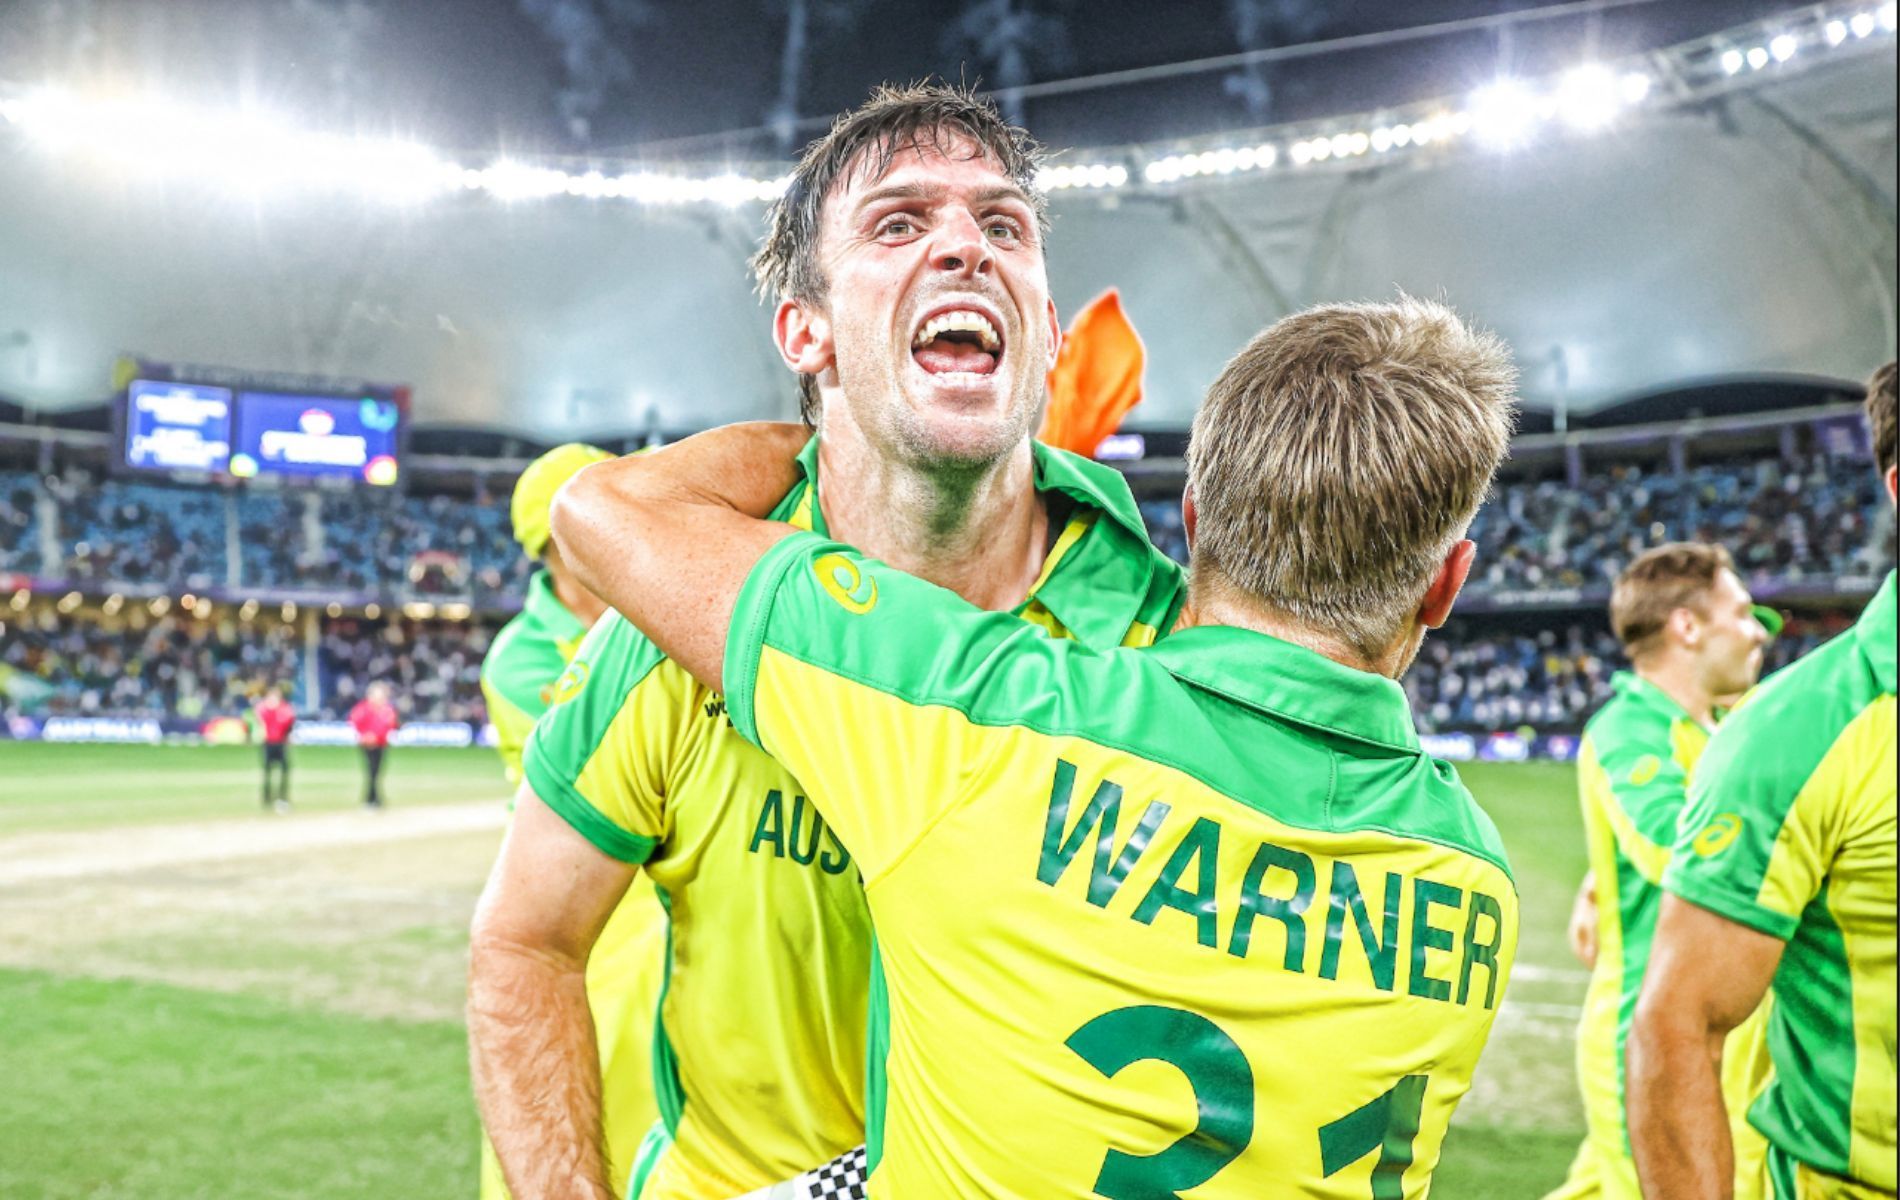 Mitchell Marsh and David Warner put on a 92-run stand to help Australia beat New Zealand in the T20 World Cup final.